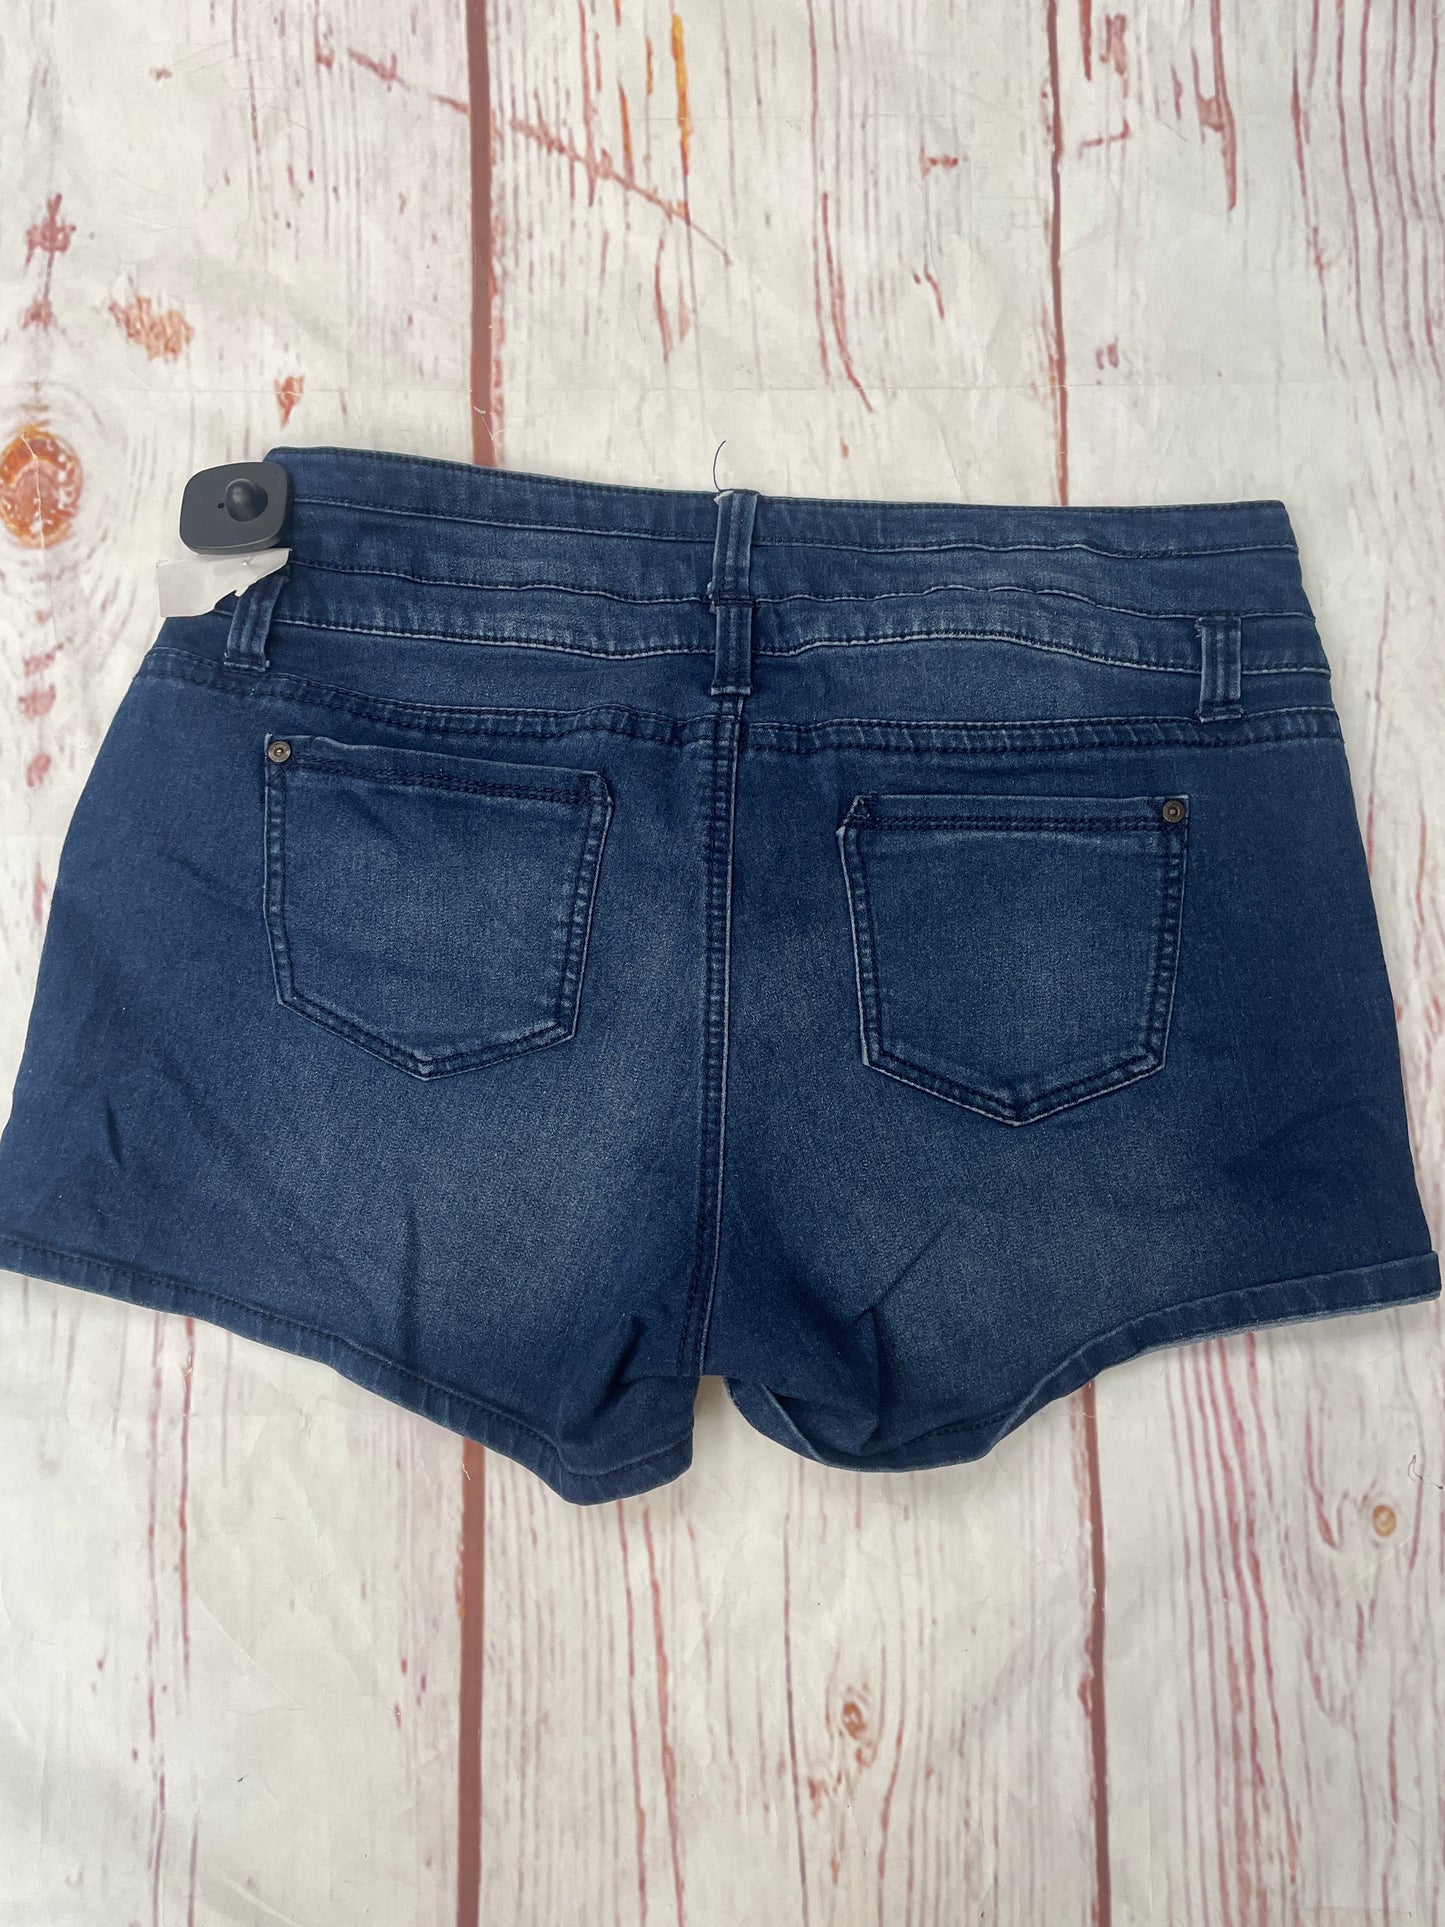 Shorts By Rue 21  Size: 20